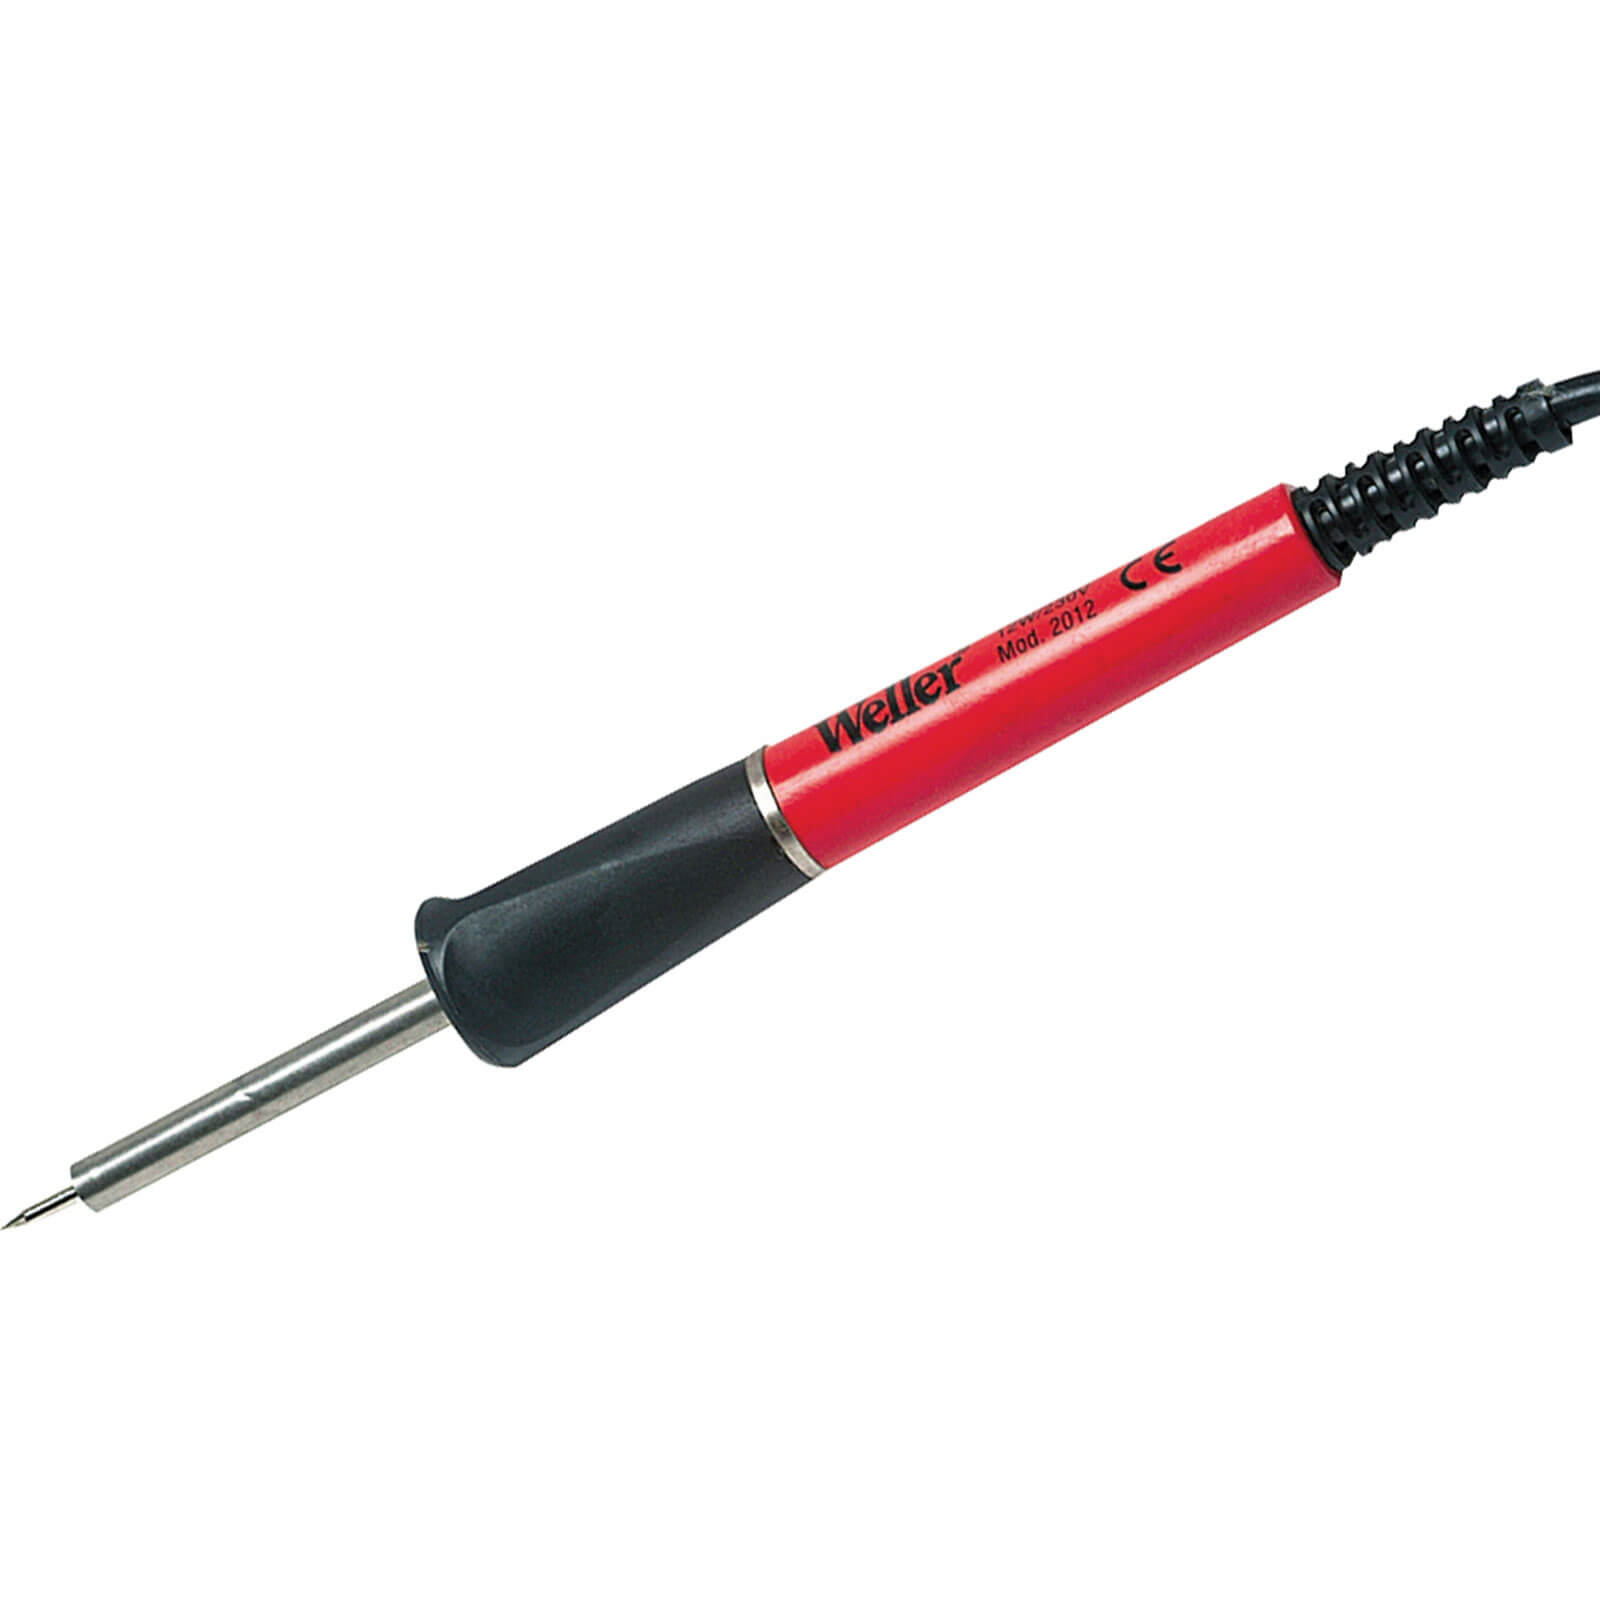 Weller 2015 Soldering Iron With Plug 15W 240v